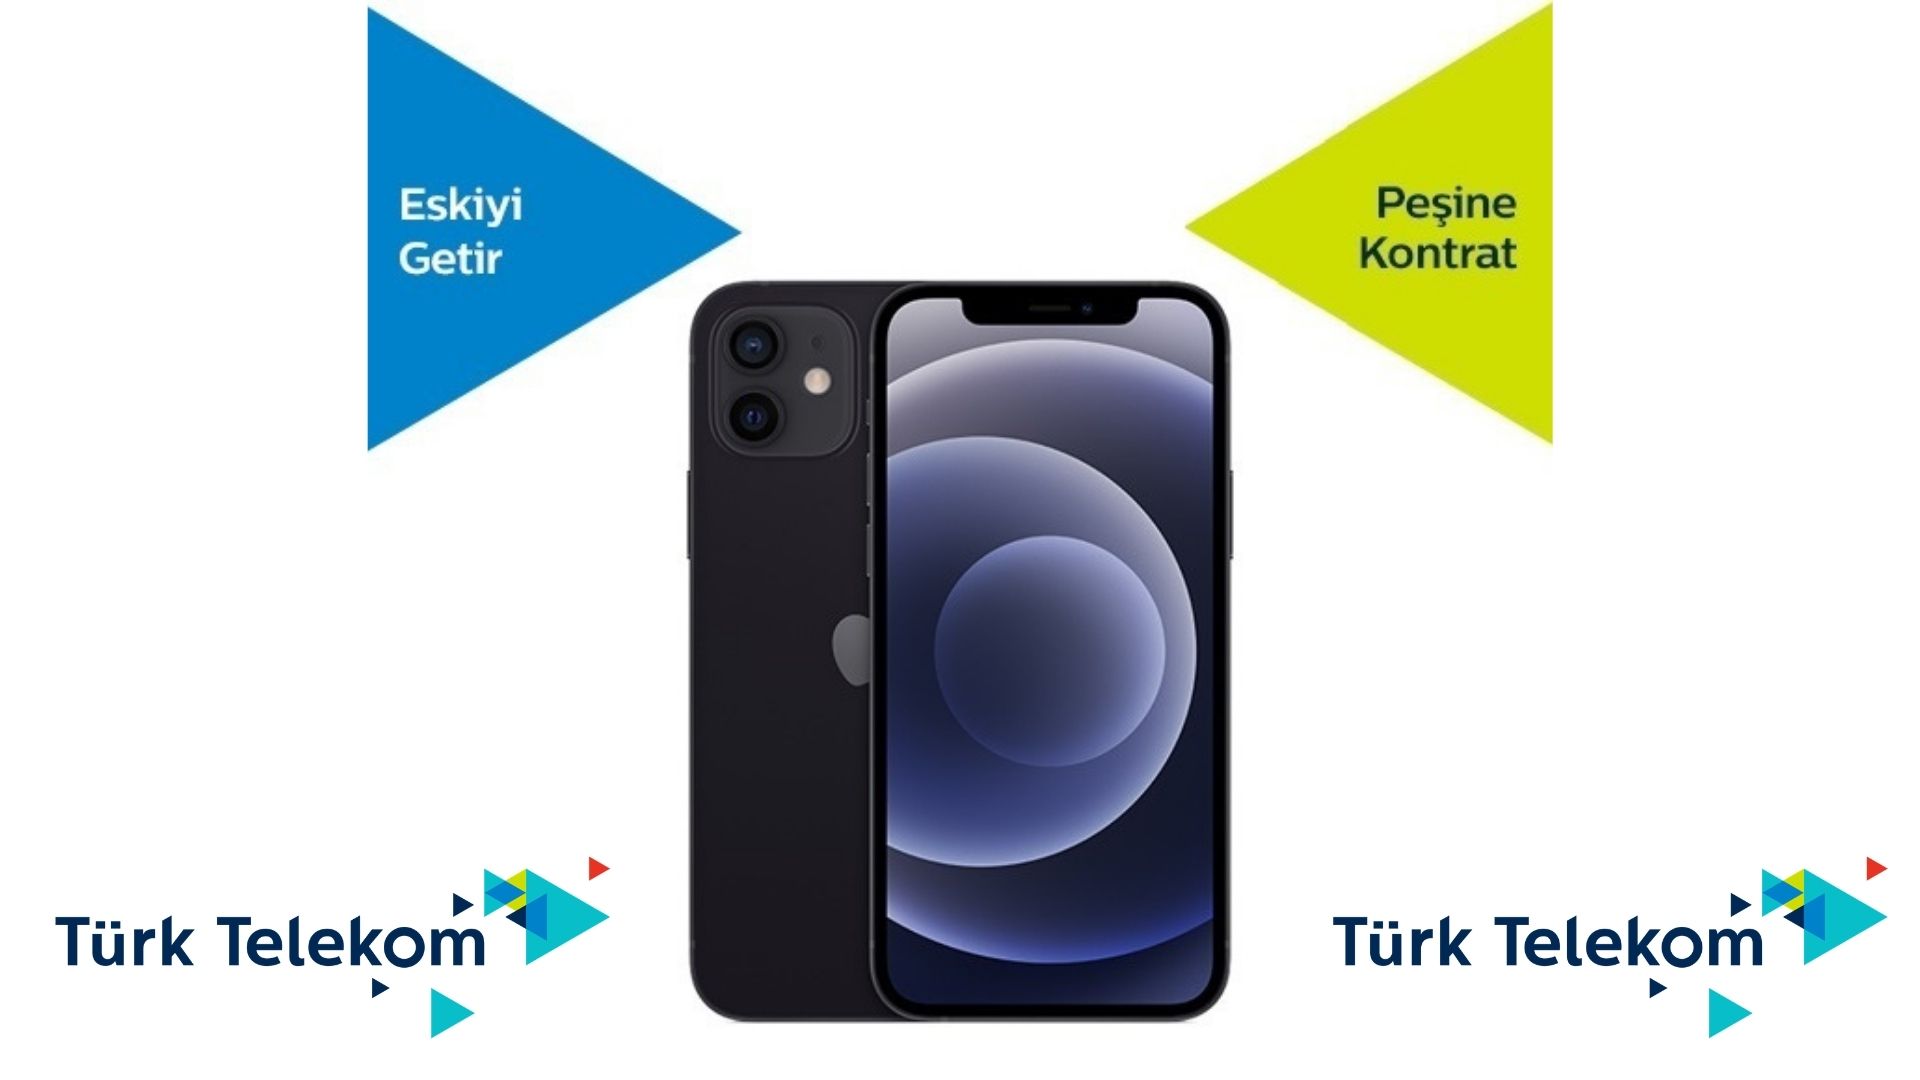 Turk Telekom bring the old and take the new campaign